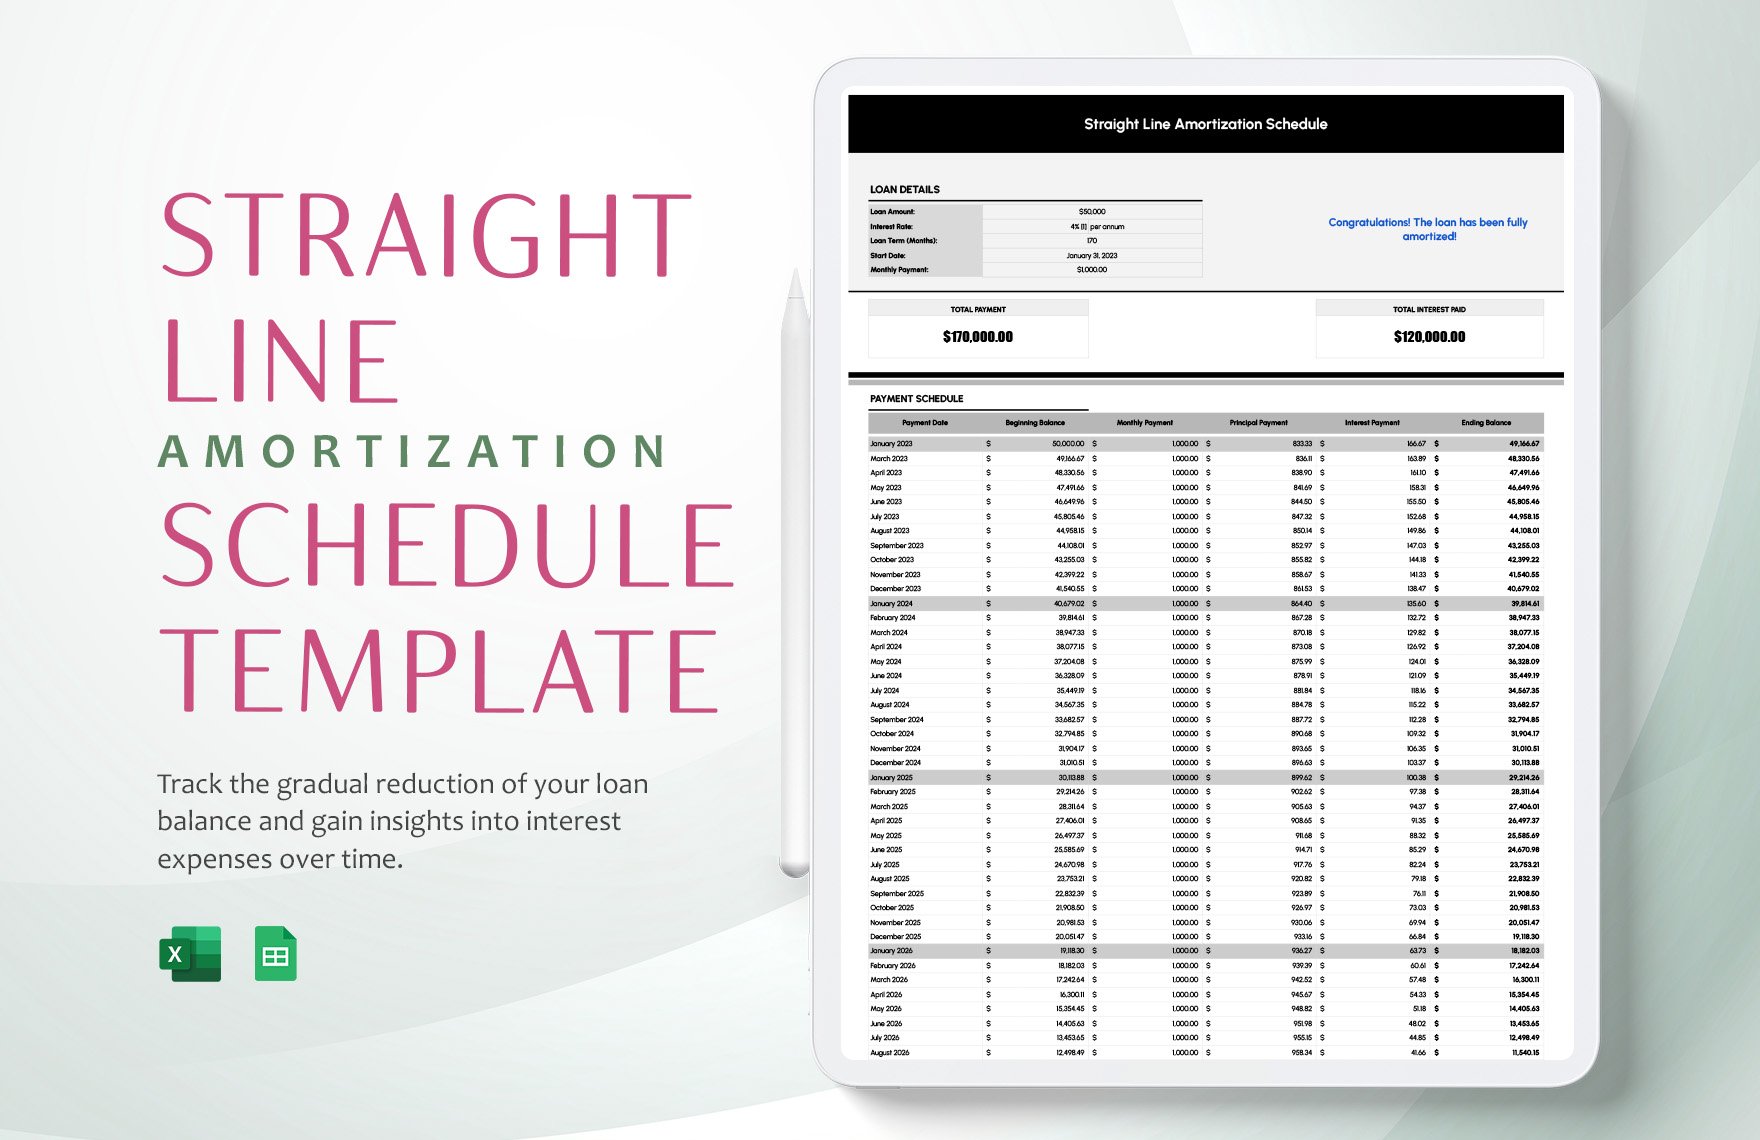 Straight Line Amortization Schedule Template